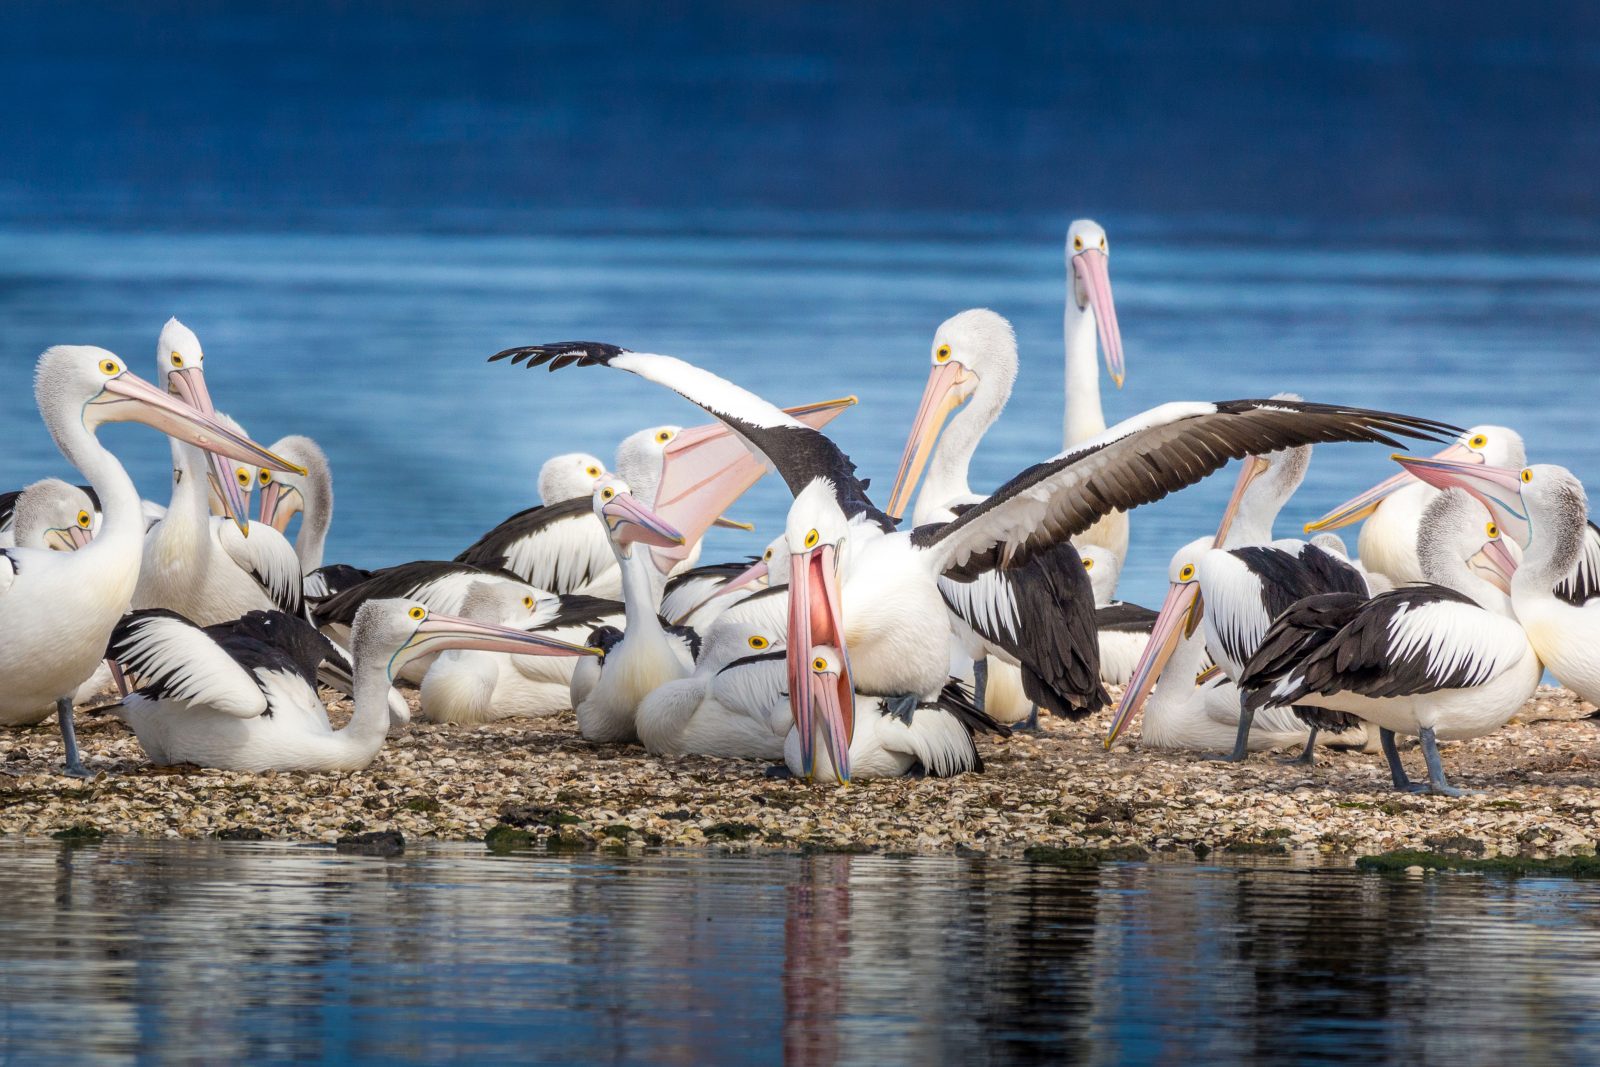 Scholes Phil_Pelicans at play_Cex Nature Photography 2021